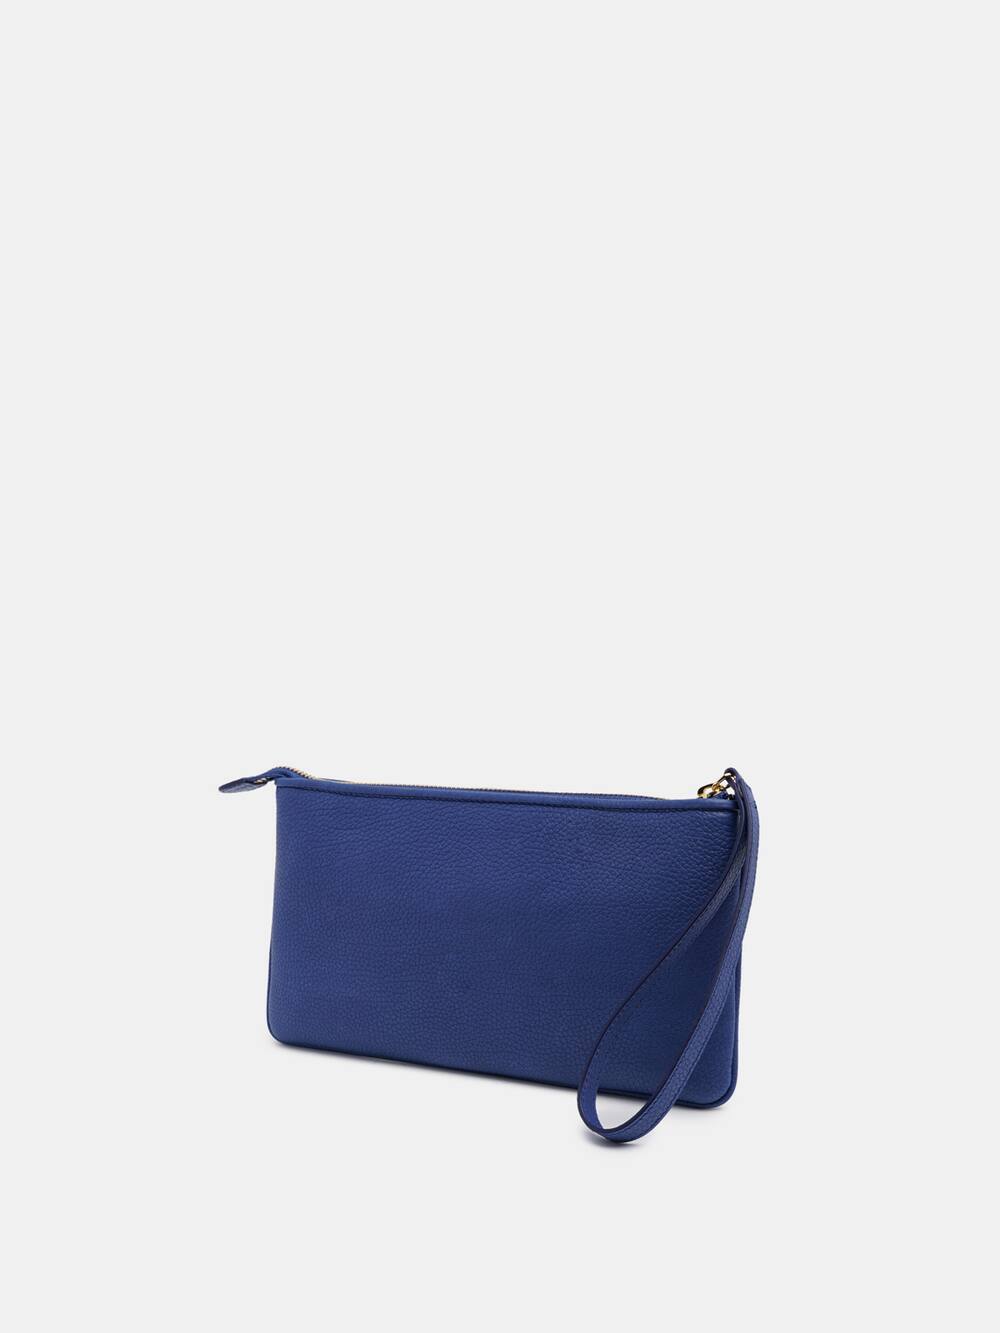 Golden Goose - Blue Star Wrist clutch bag in grained leather in 